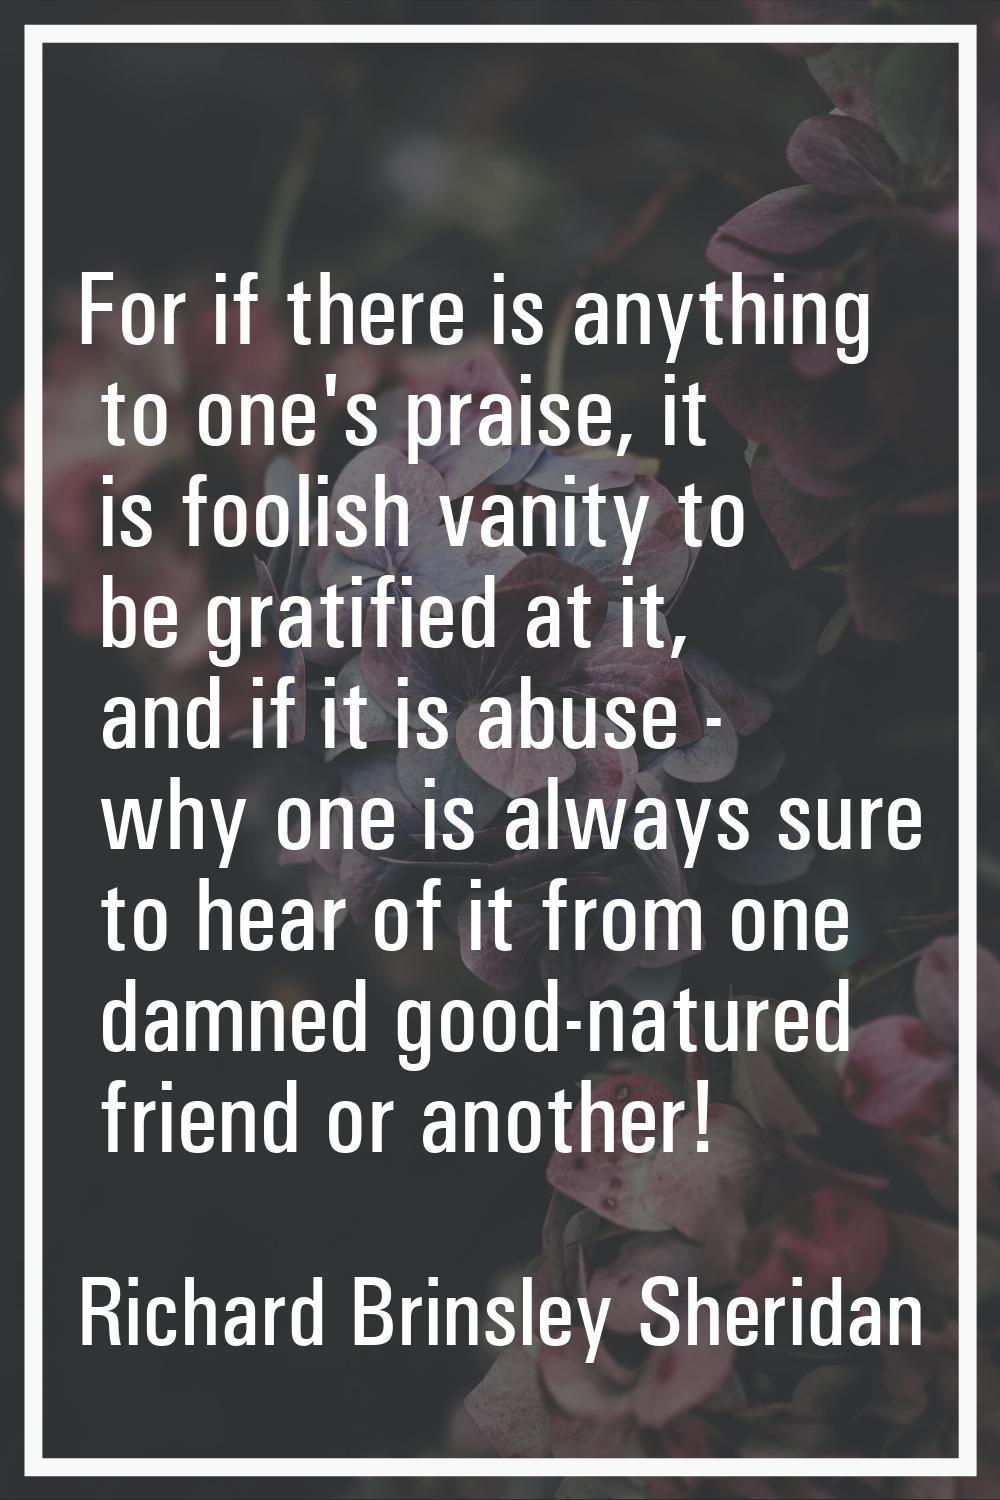 For if there is anything to one's praise, it is foolish vanity to be gratified at it, and if it is 